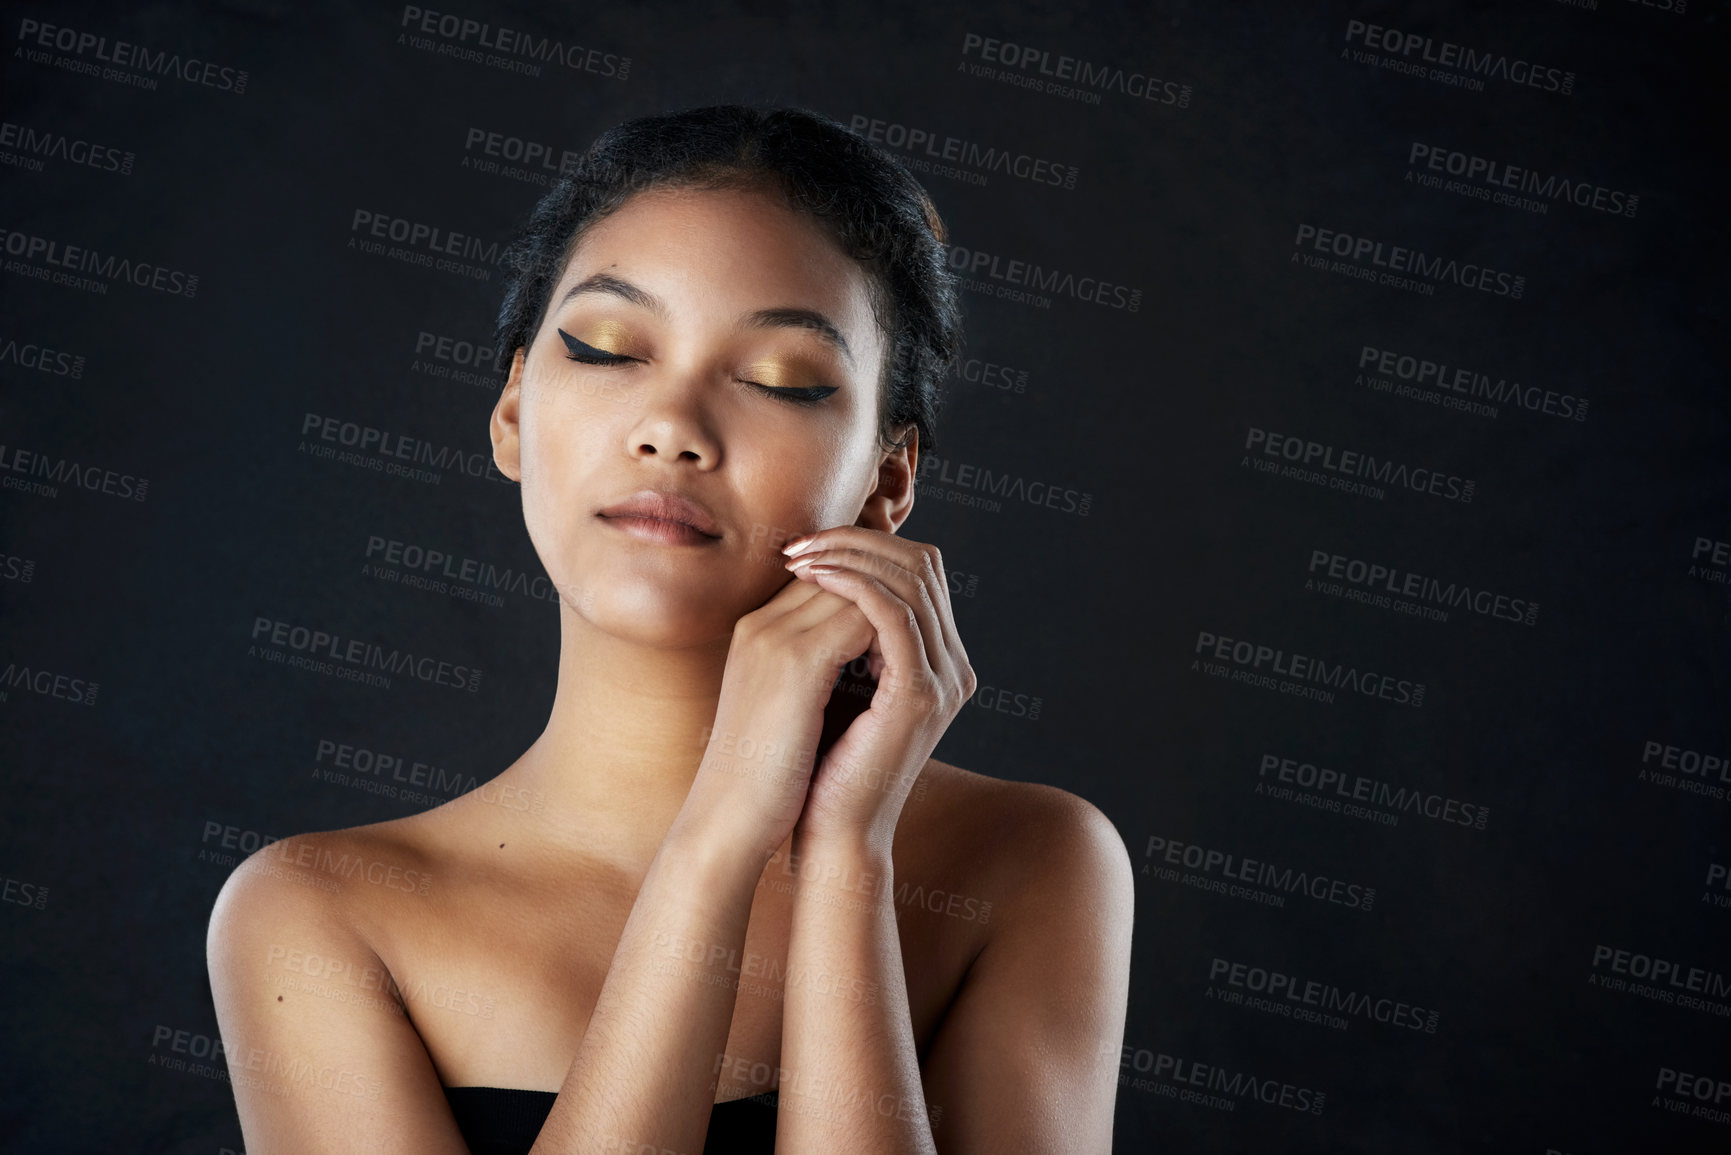 Buy stock photo Shot of a beautiful woman posing against a black background